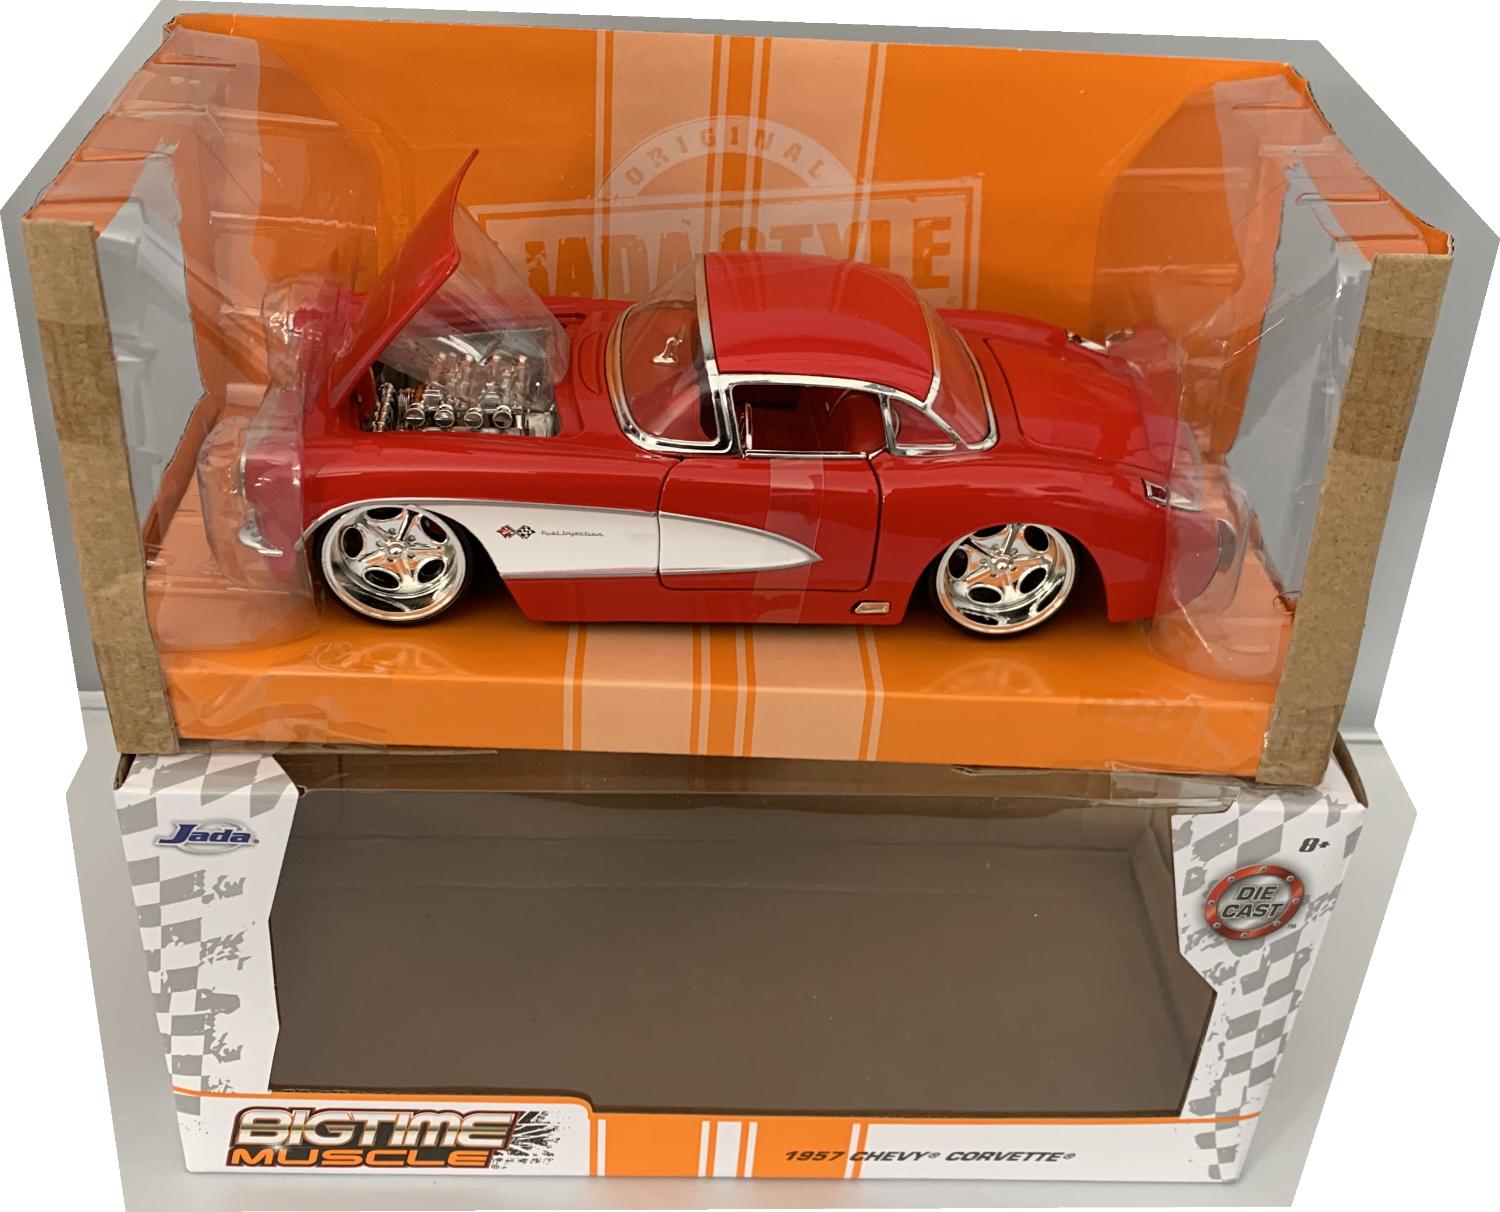 A good reproduction of the Chevy Corvette with detail throughout, all authentically recreated.  Model is presented in a window display box, the car is approx. 20 cm long and the presentation box is 25 cm long